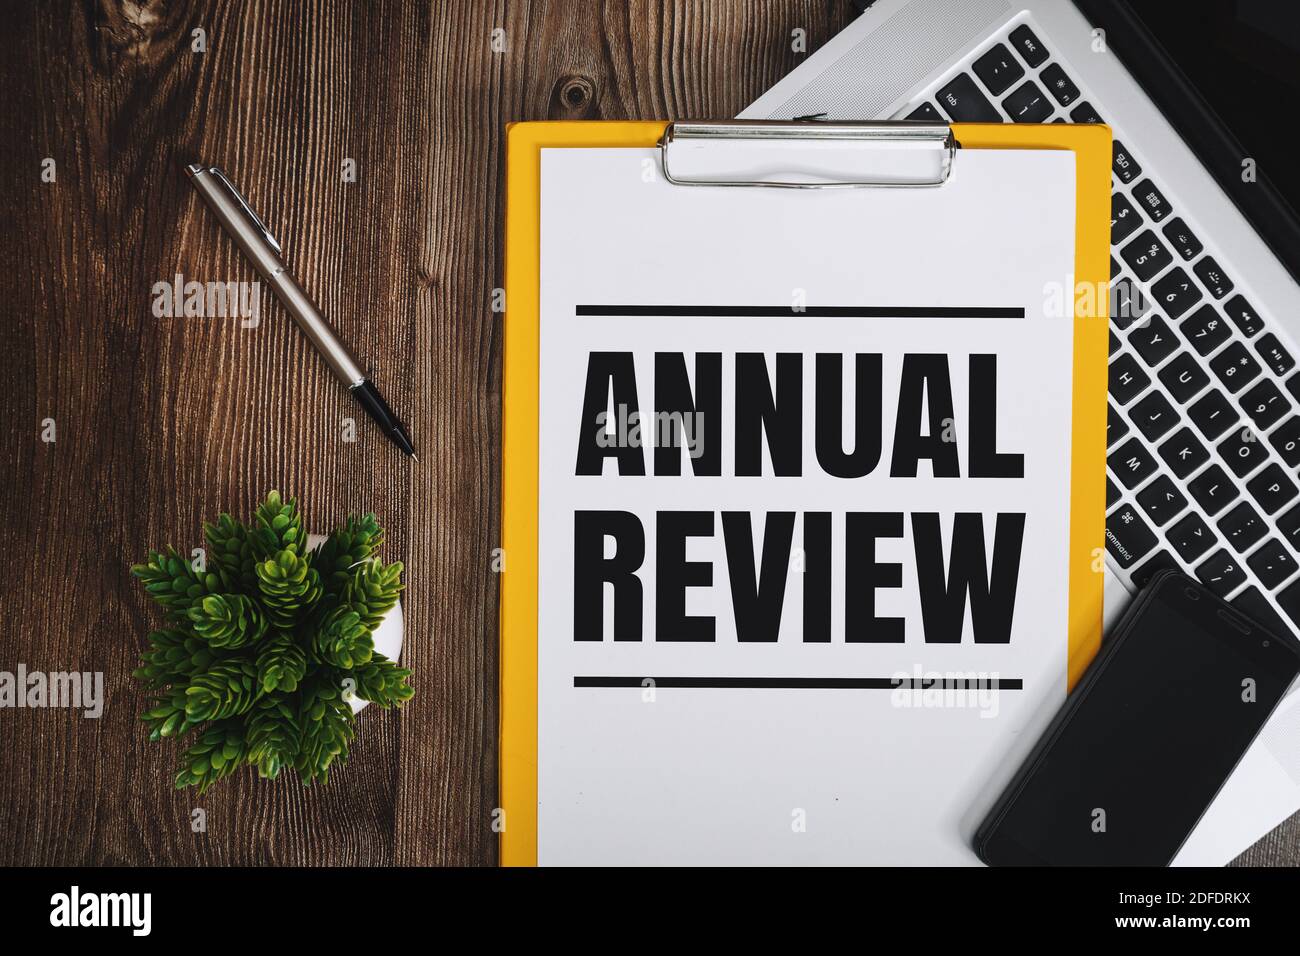 Annual Review on Clipboard over Wooden Work Desk Stock Photo